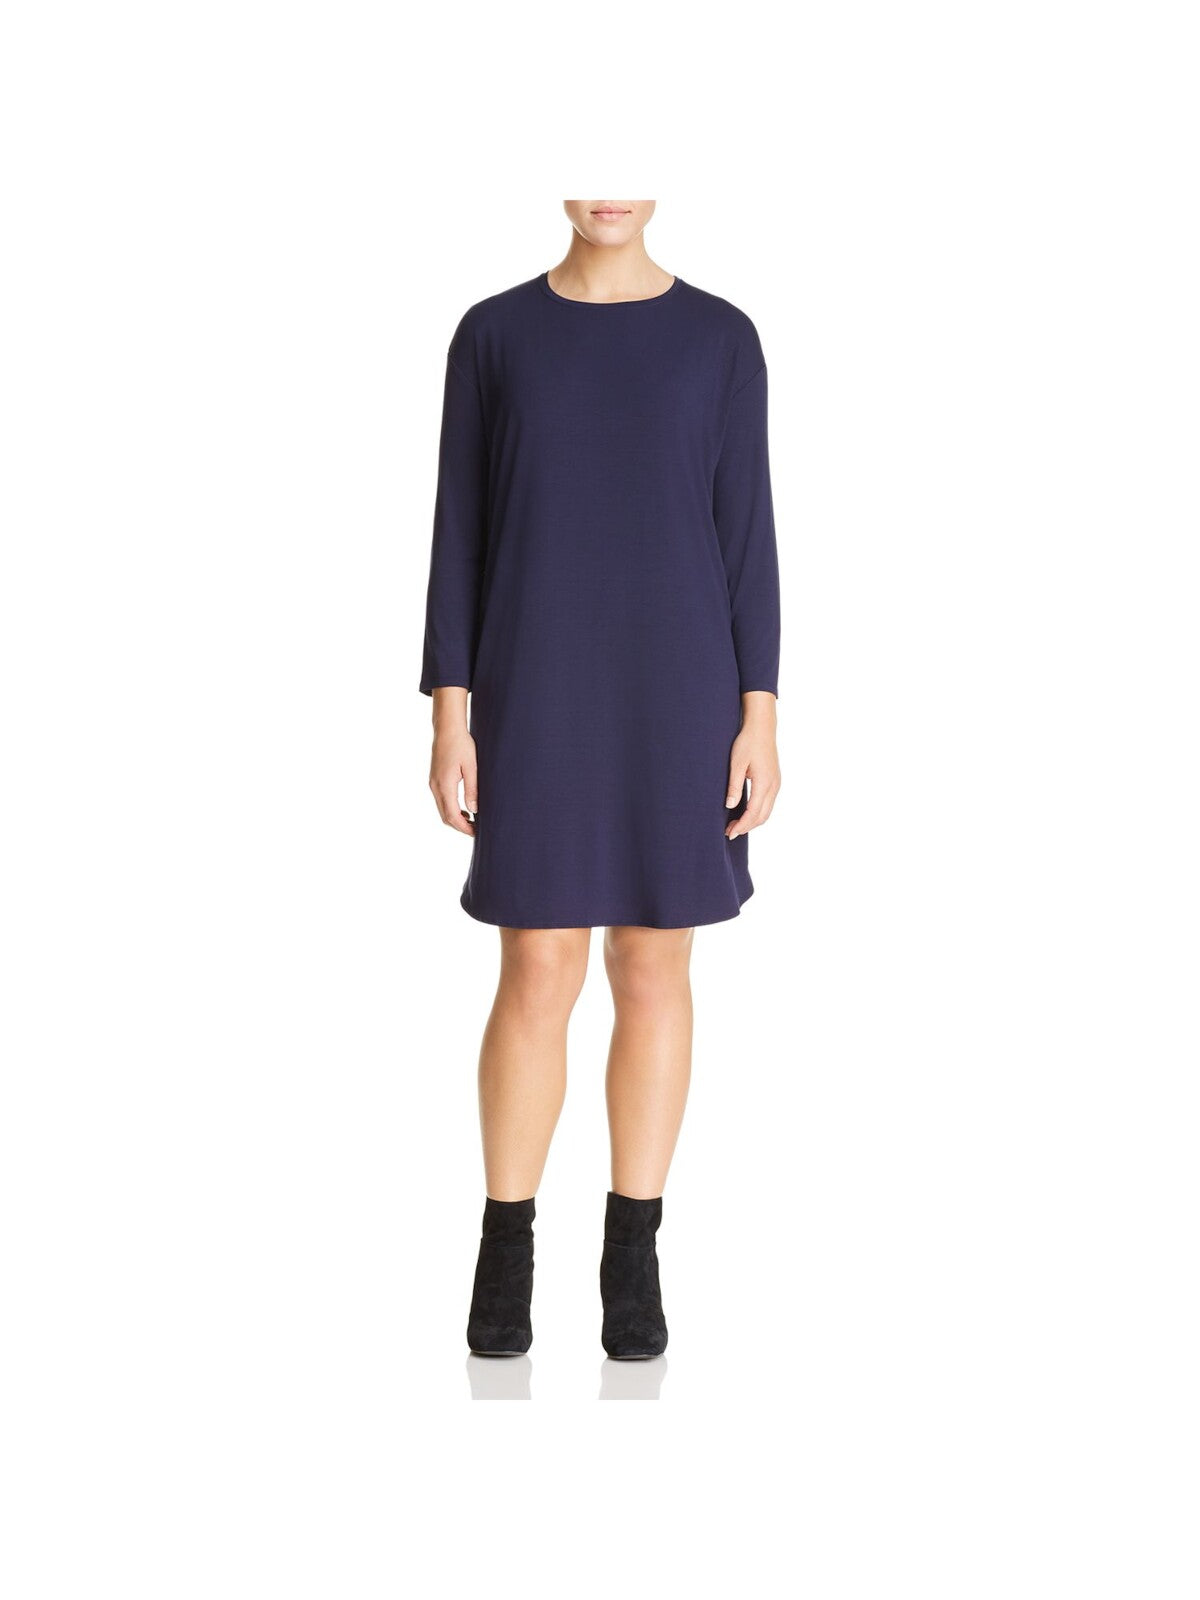 EILEEN FISHER Womens Navy Stretch Long Sleeve Jewel Neck Above The Knee Wear To Work Shift Dress Plus 1X